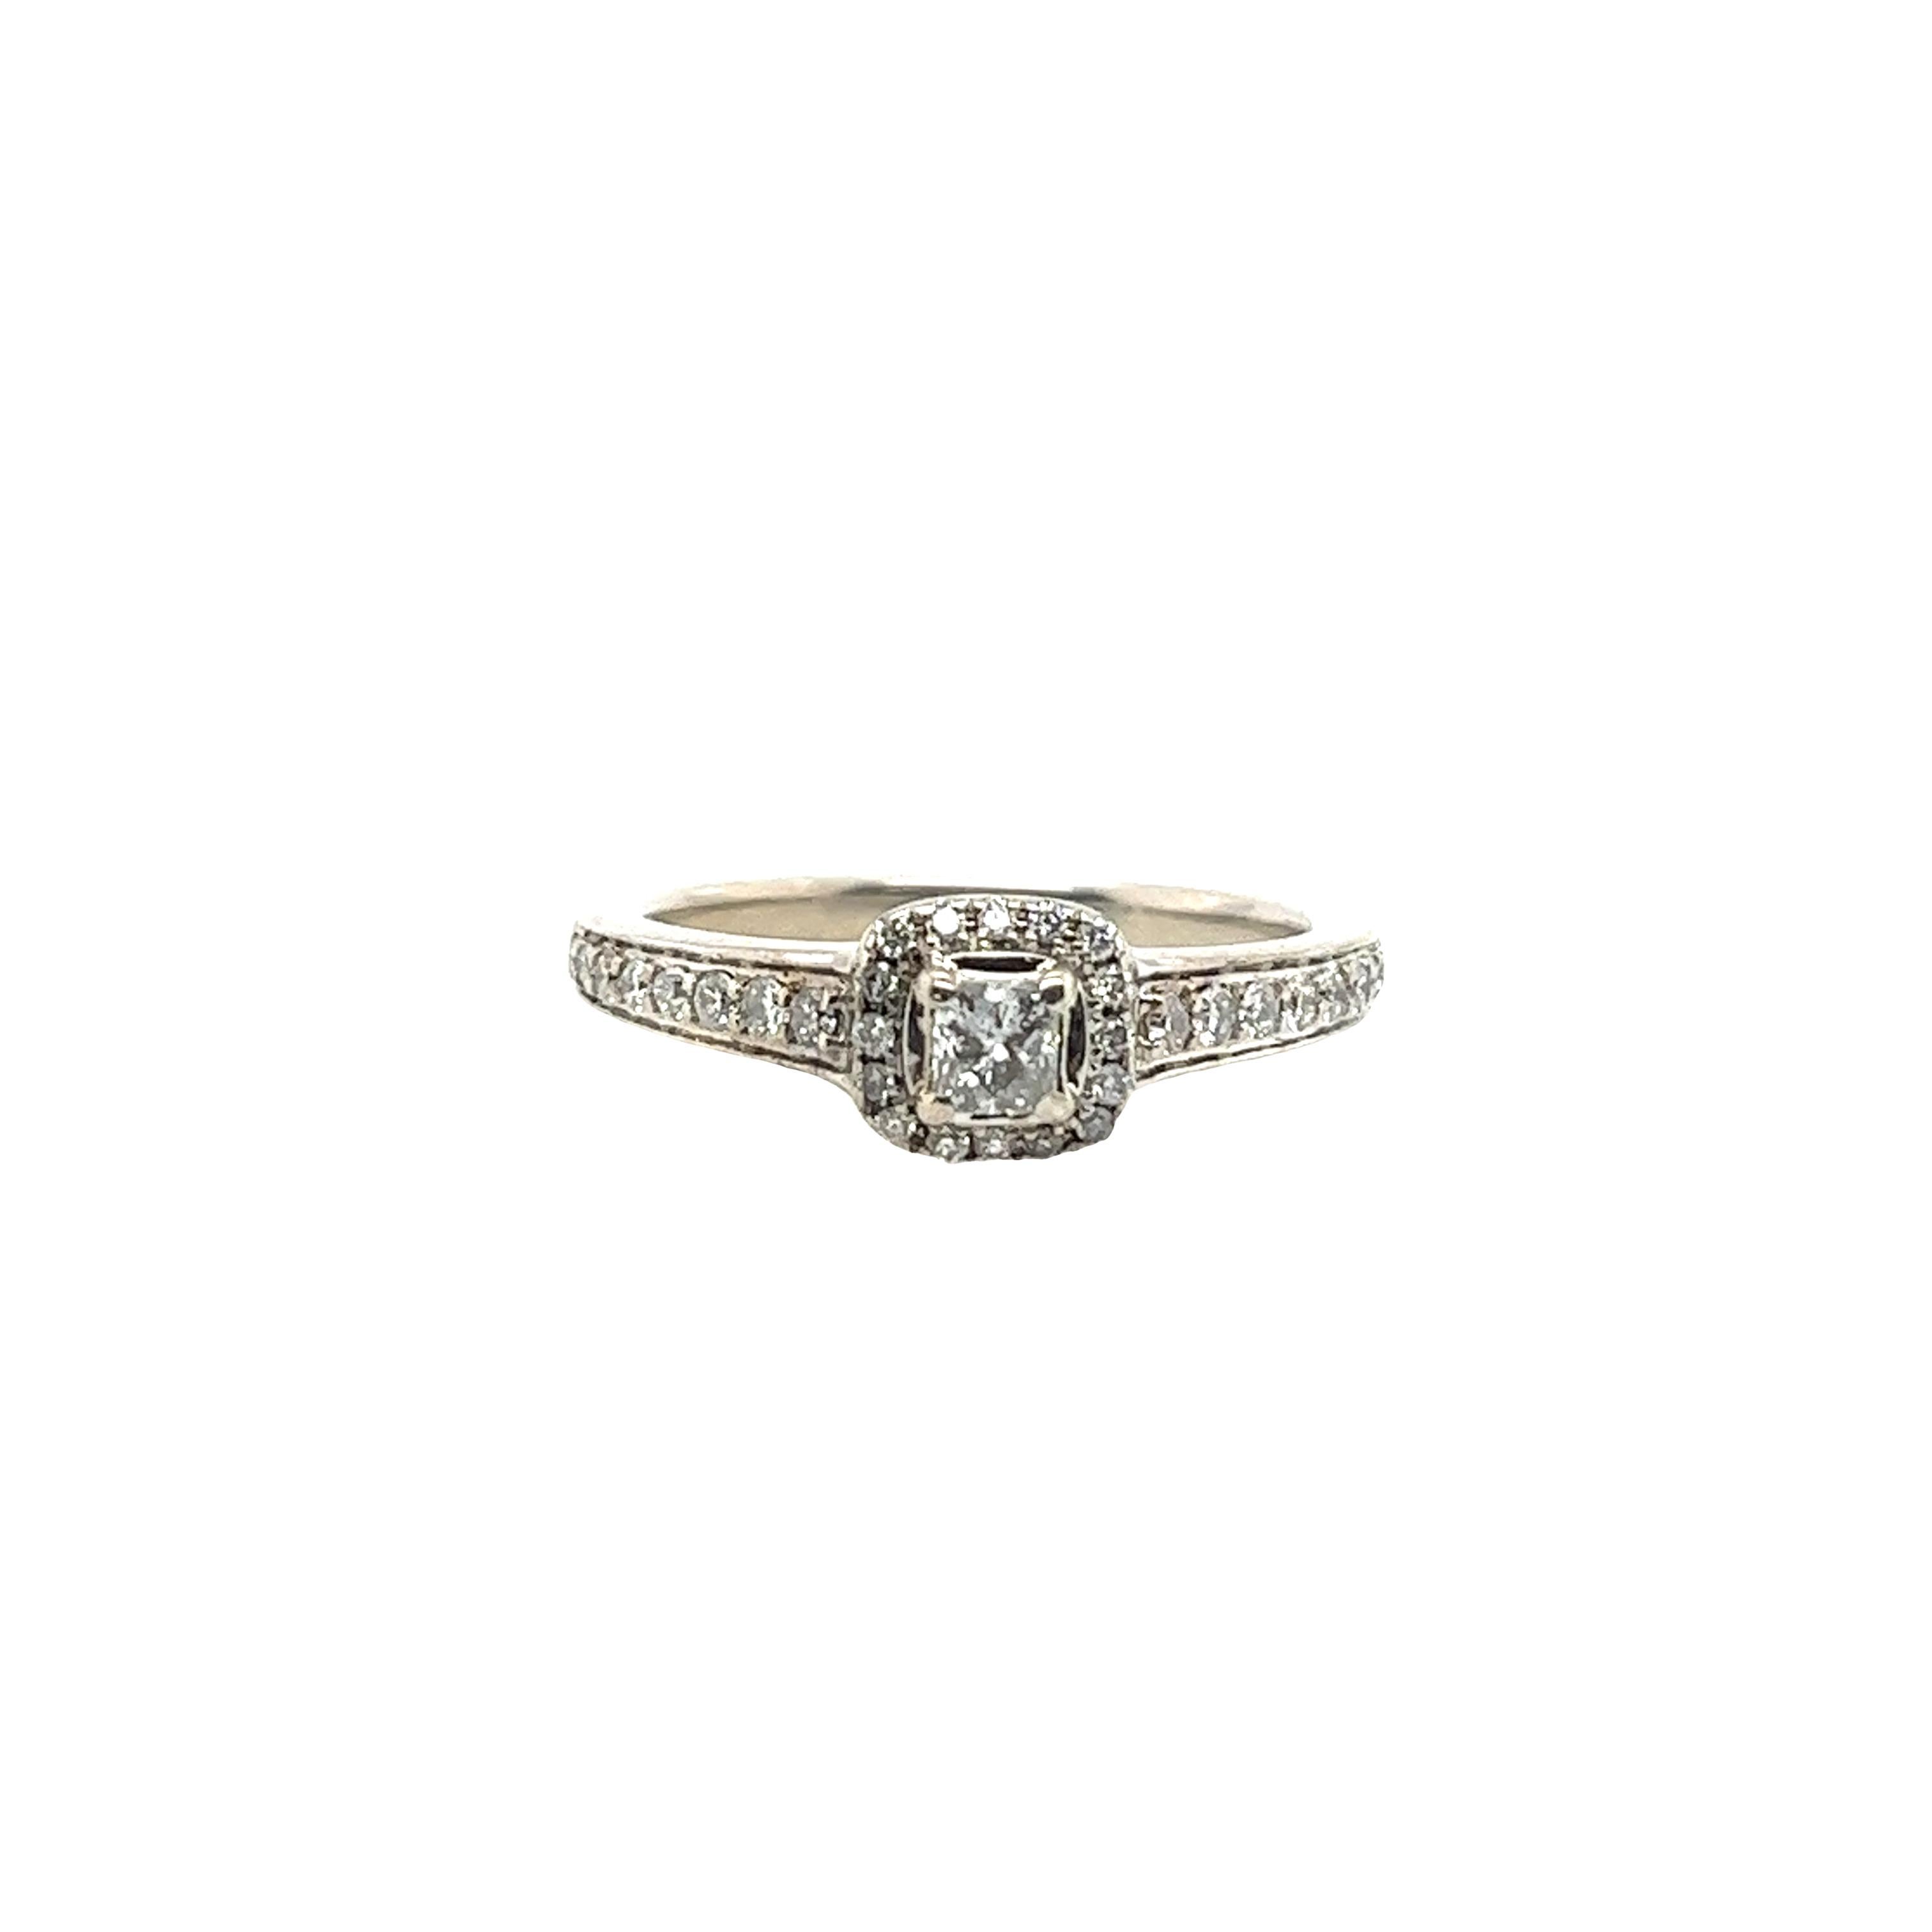 Women's 18ct White Gold Diamond Solitaire Ring Set With 0.50ct of Diamonds